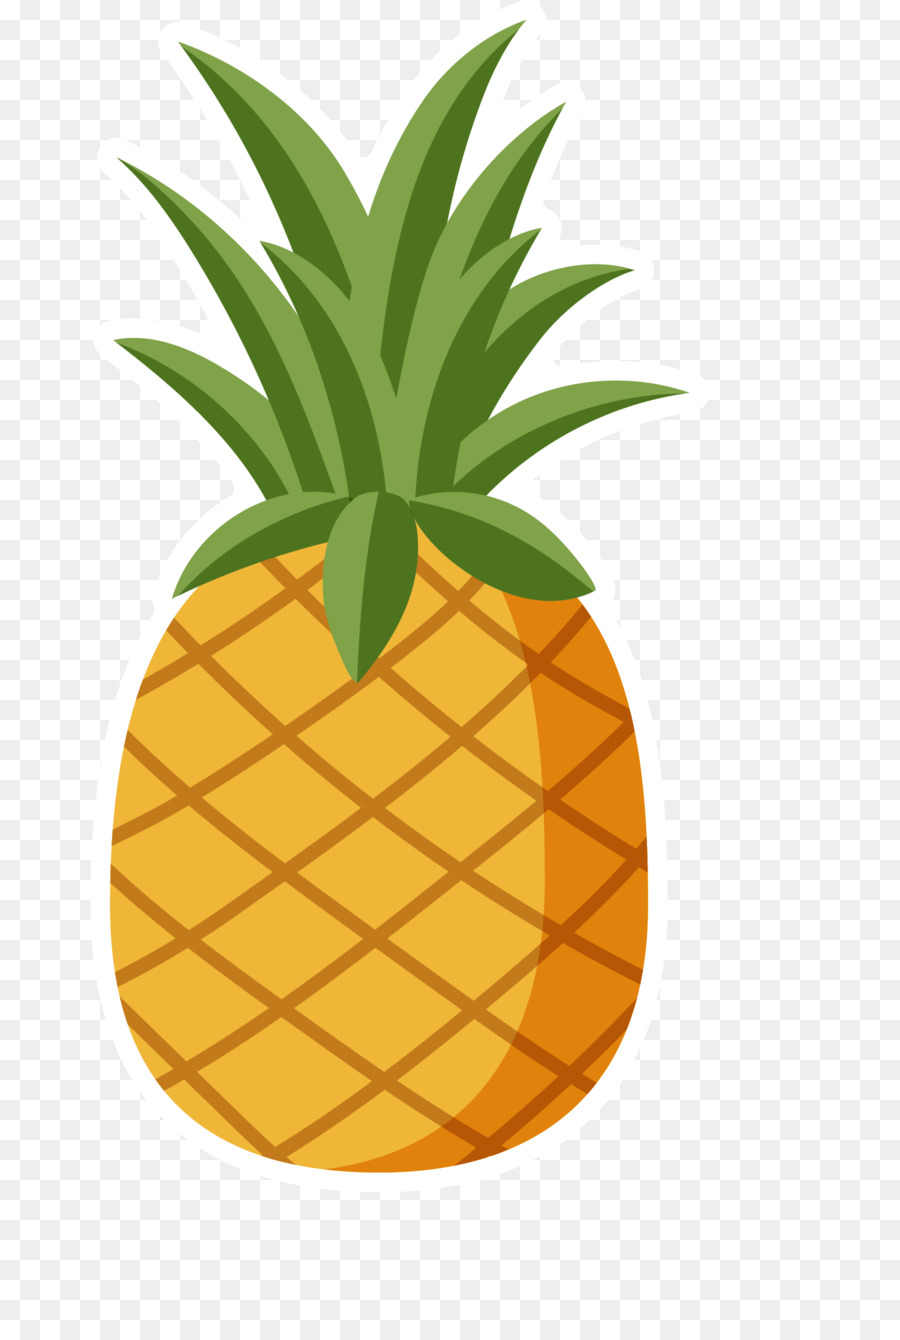 Pineapple Hawaiian pizza Clip art - Hand painted yellow pineapple png download - 1501*2222 - Free Transparent Pineapple png Download.